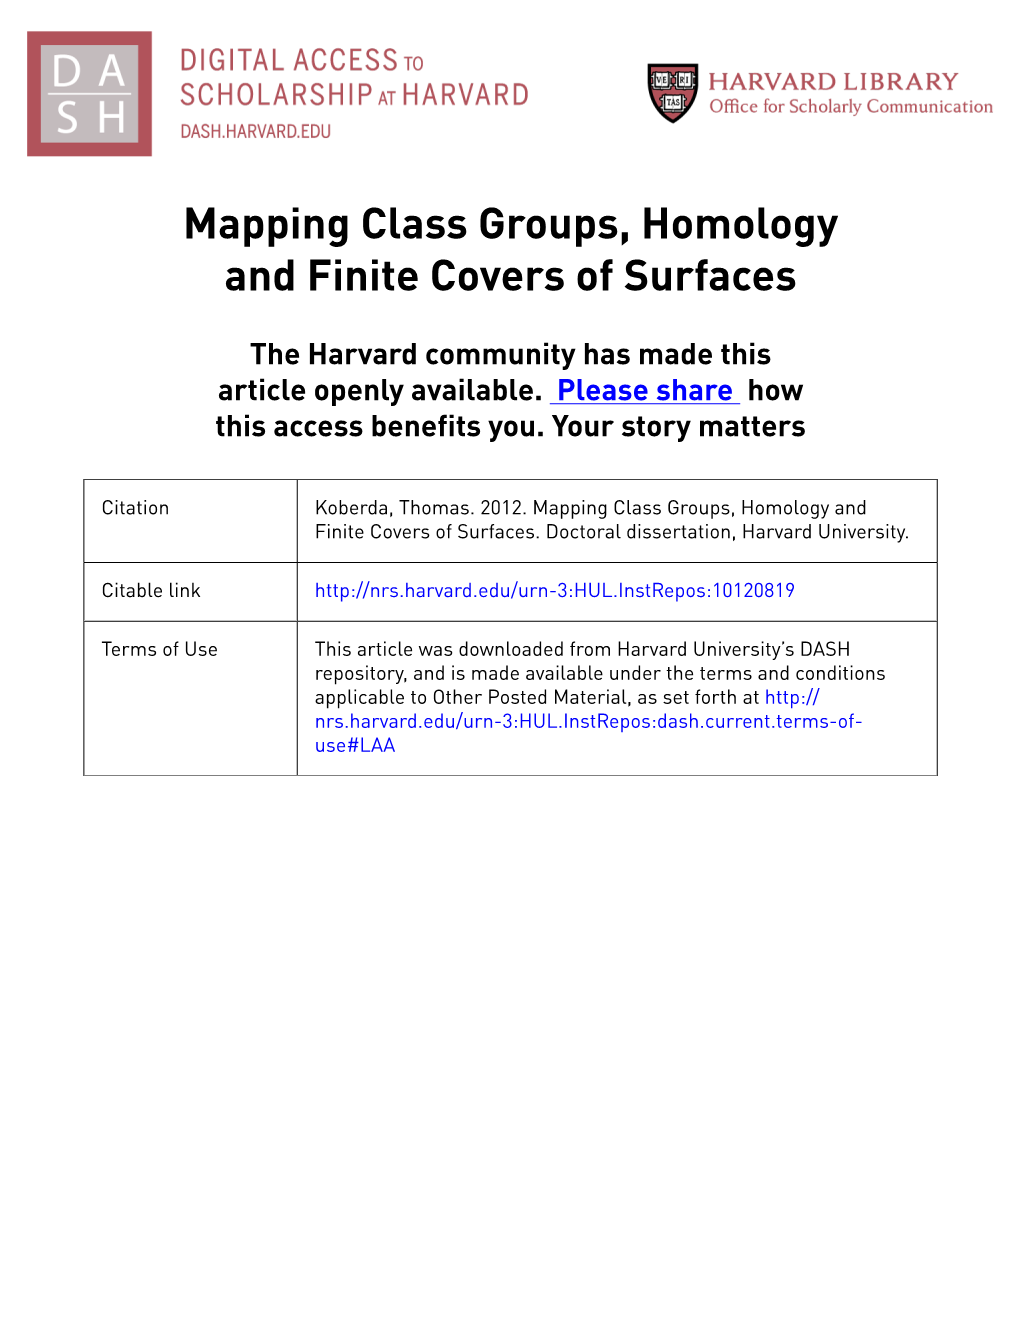 Mapping Class Groups, Homology and Finite Covers of Surfaces